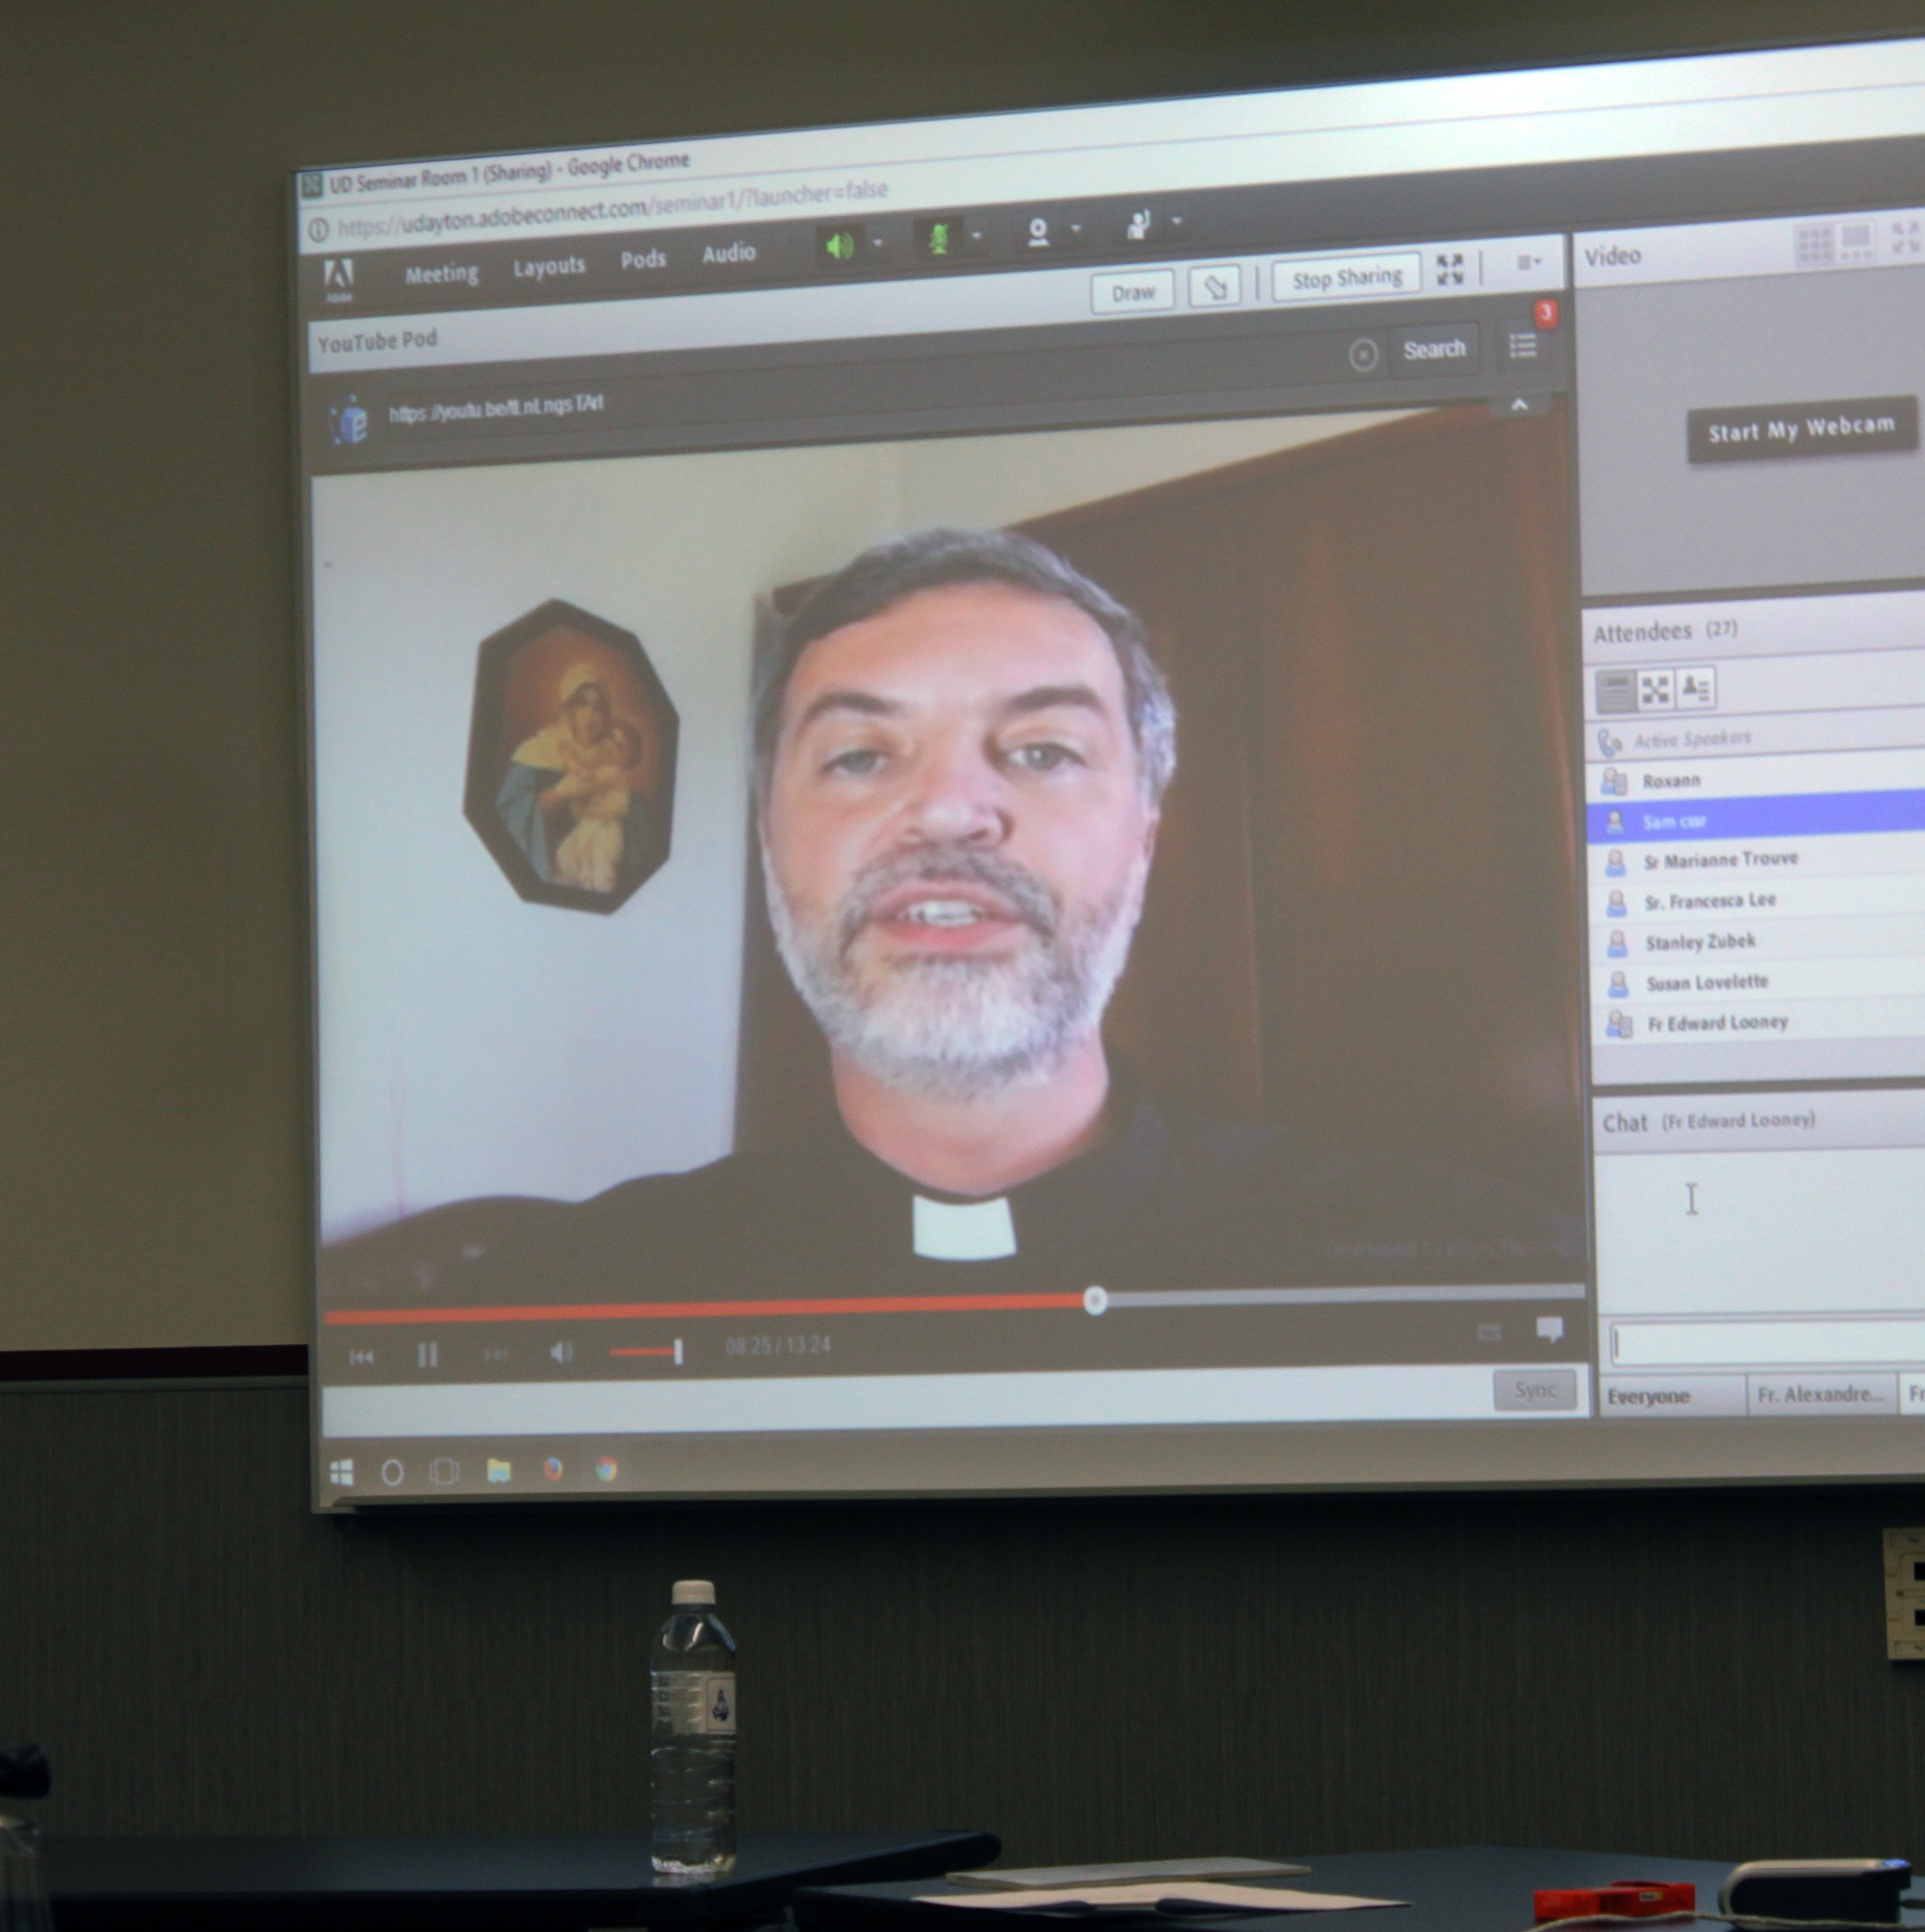 Fr. Alexandre Awi Mello's talk on "Pope Francis' View of Mary and the Church" was pre-recorded for the forum from his home in Brazil.